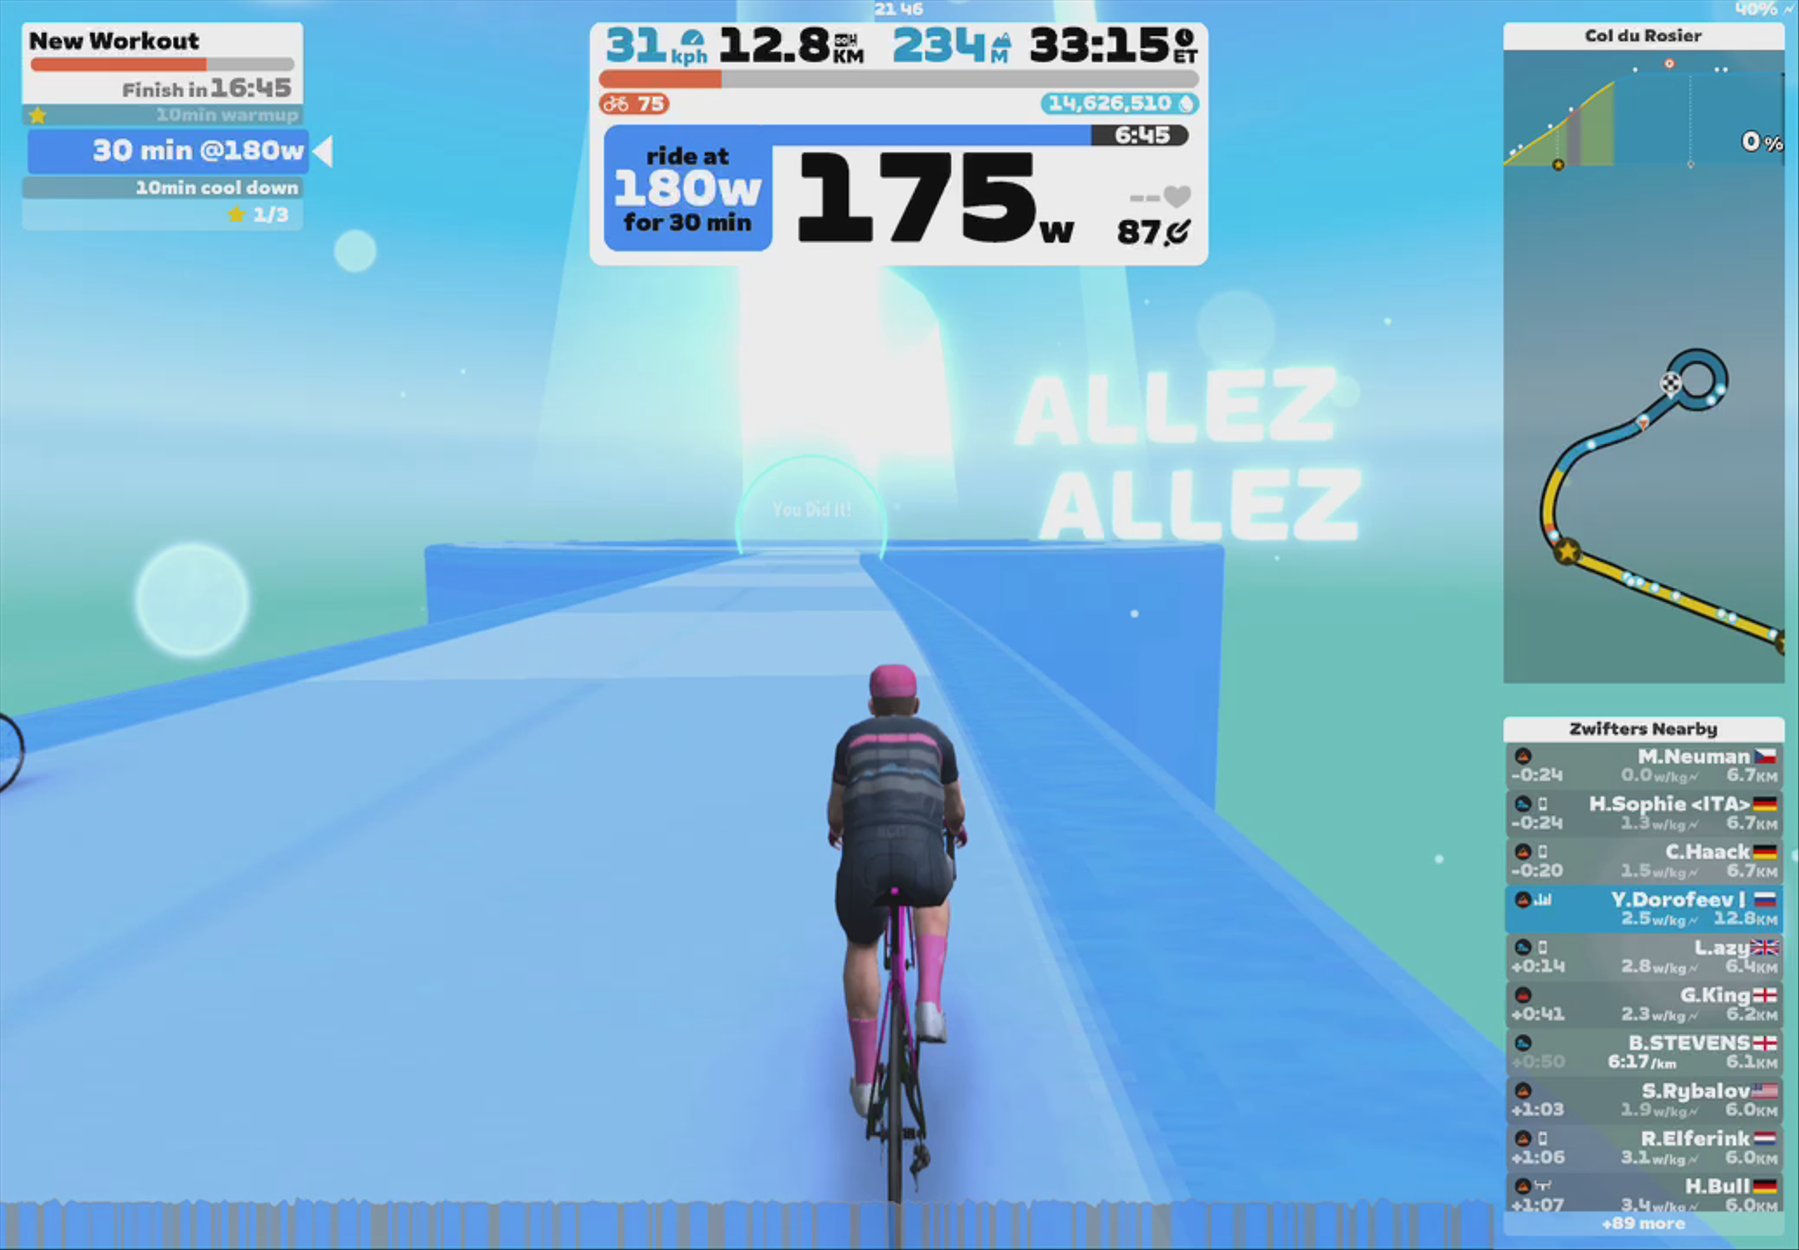 Zwift - New Workout on Col du Rosier in France